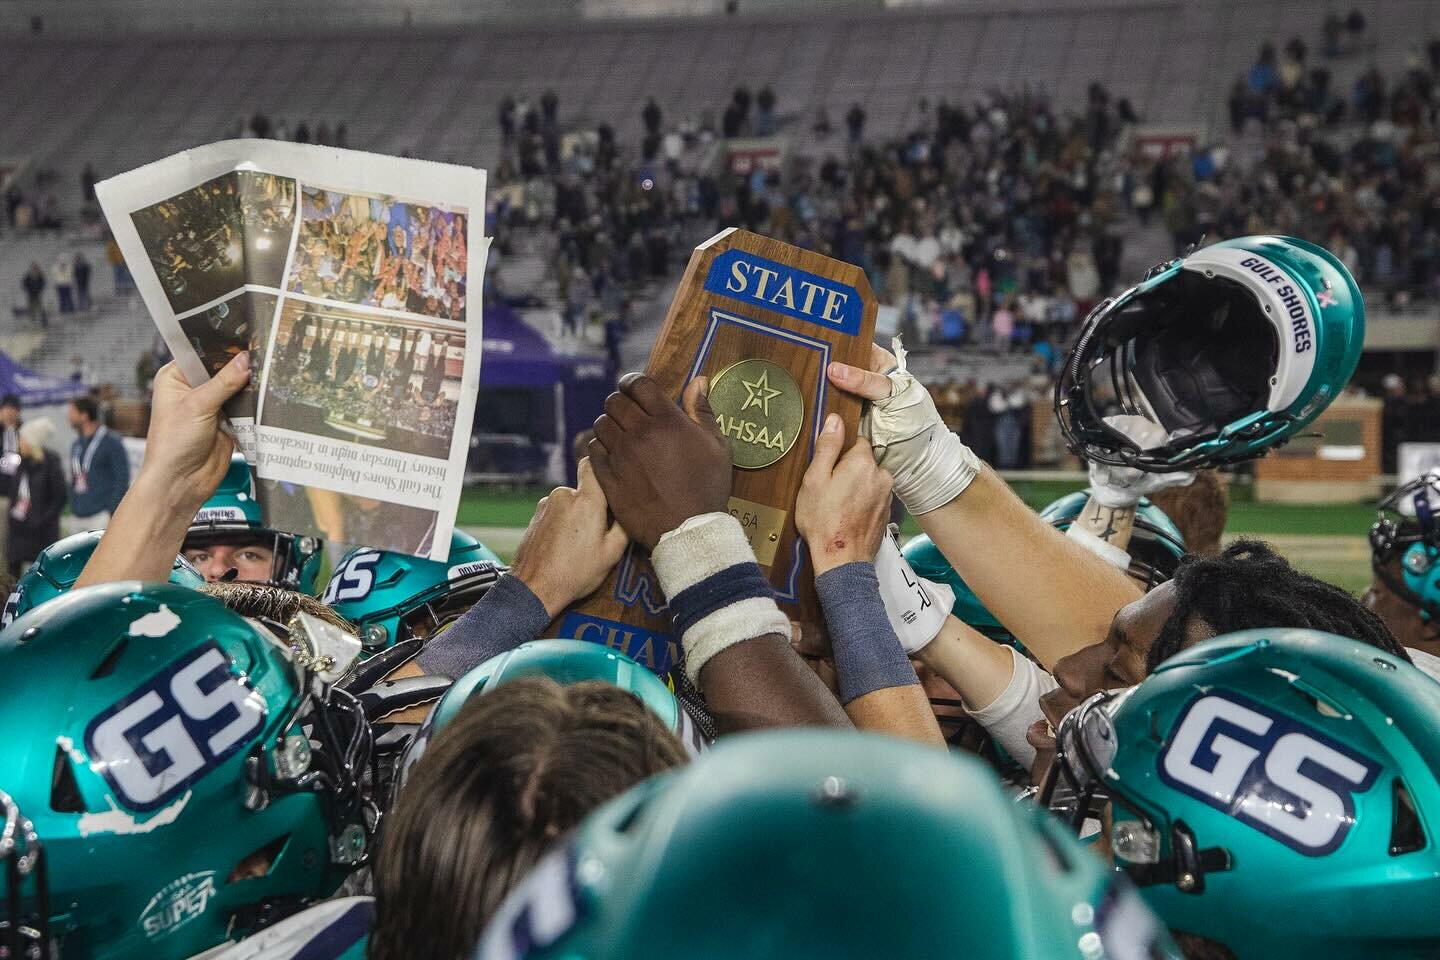 The Class 5A Blue Map trophy is heading back to Gulf Shores after Thursday’s 21-14 win over the Ramsay Rams at Bryant-Denny Stadium in Tuscaloosa. It marks the Dolphins’ first state championship in their 24th varsity season.